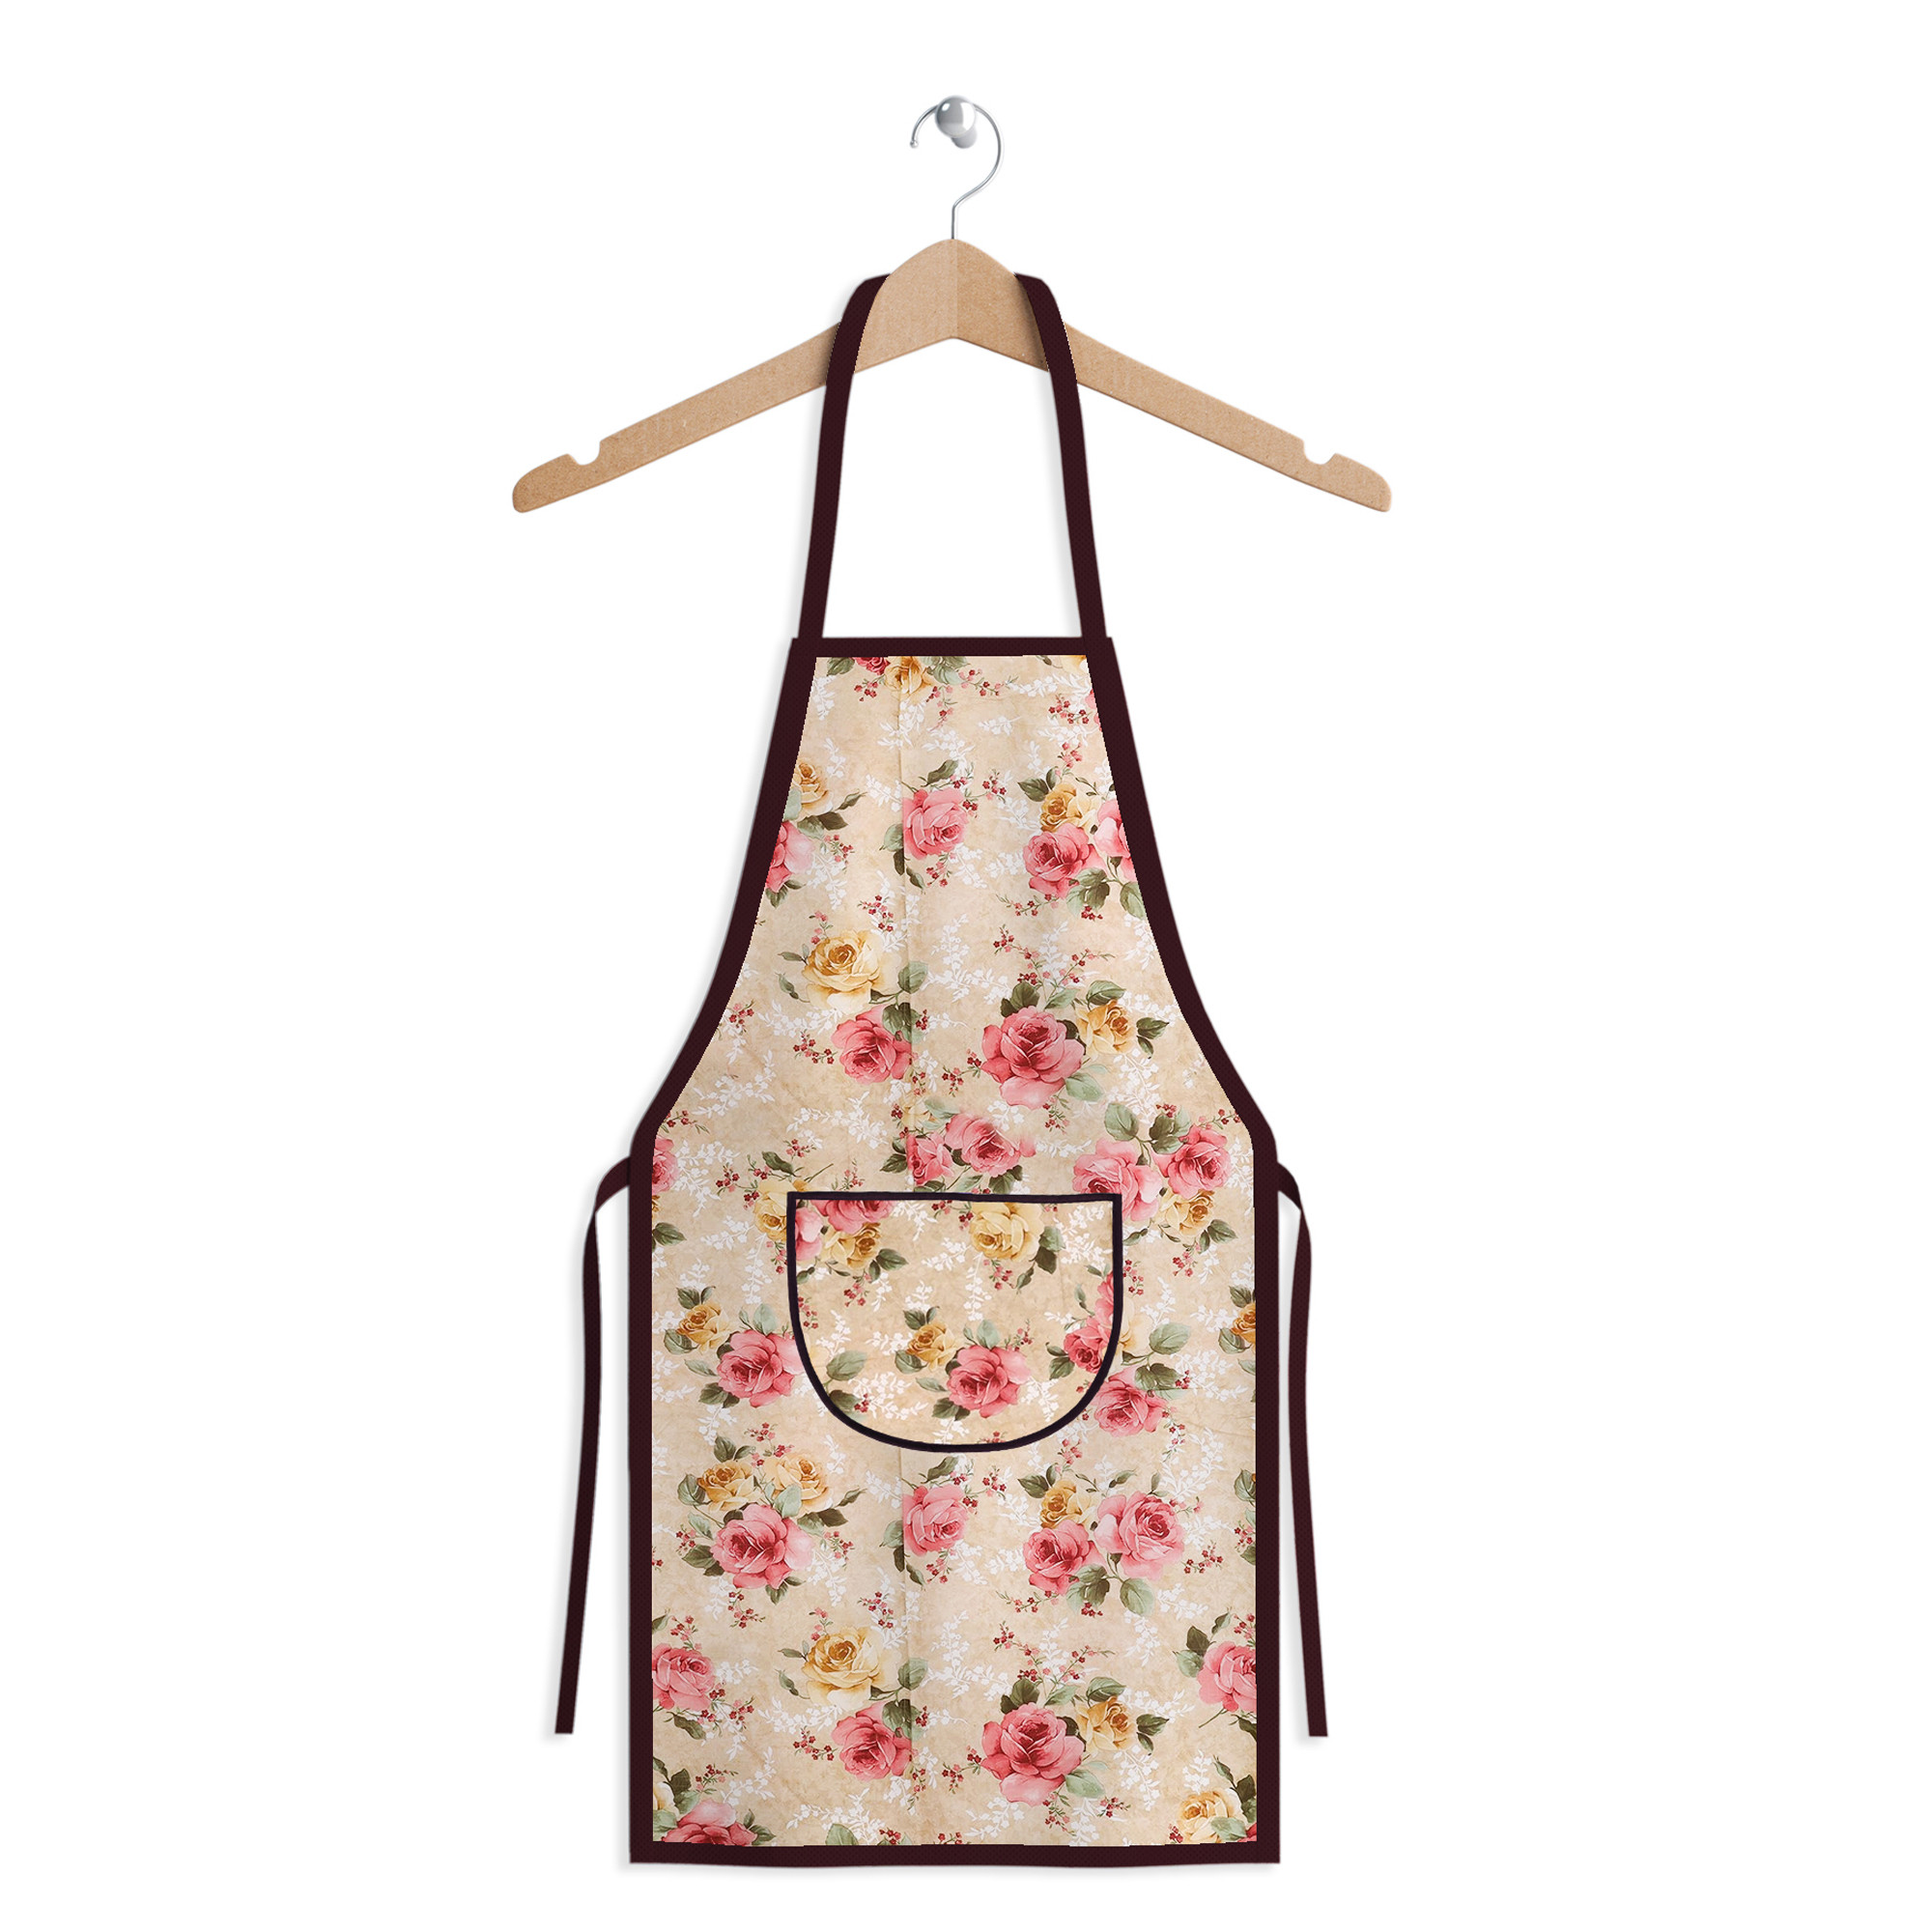 Kuber Industries Apron | PVC Cooking Kitchen Apron | Apron for Restaurent | Flower Apron for Housewife | Chef Apron with Ties | Center Pocket Apron | Beige